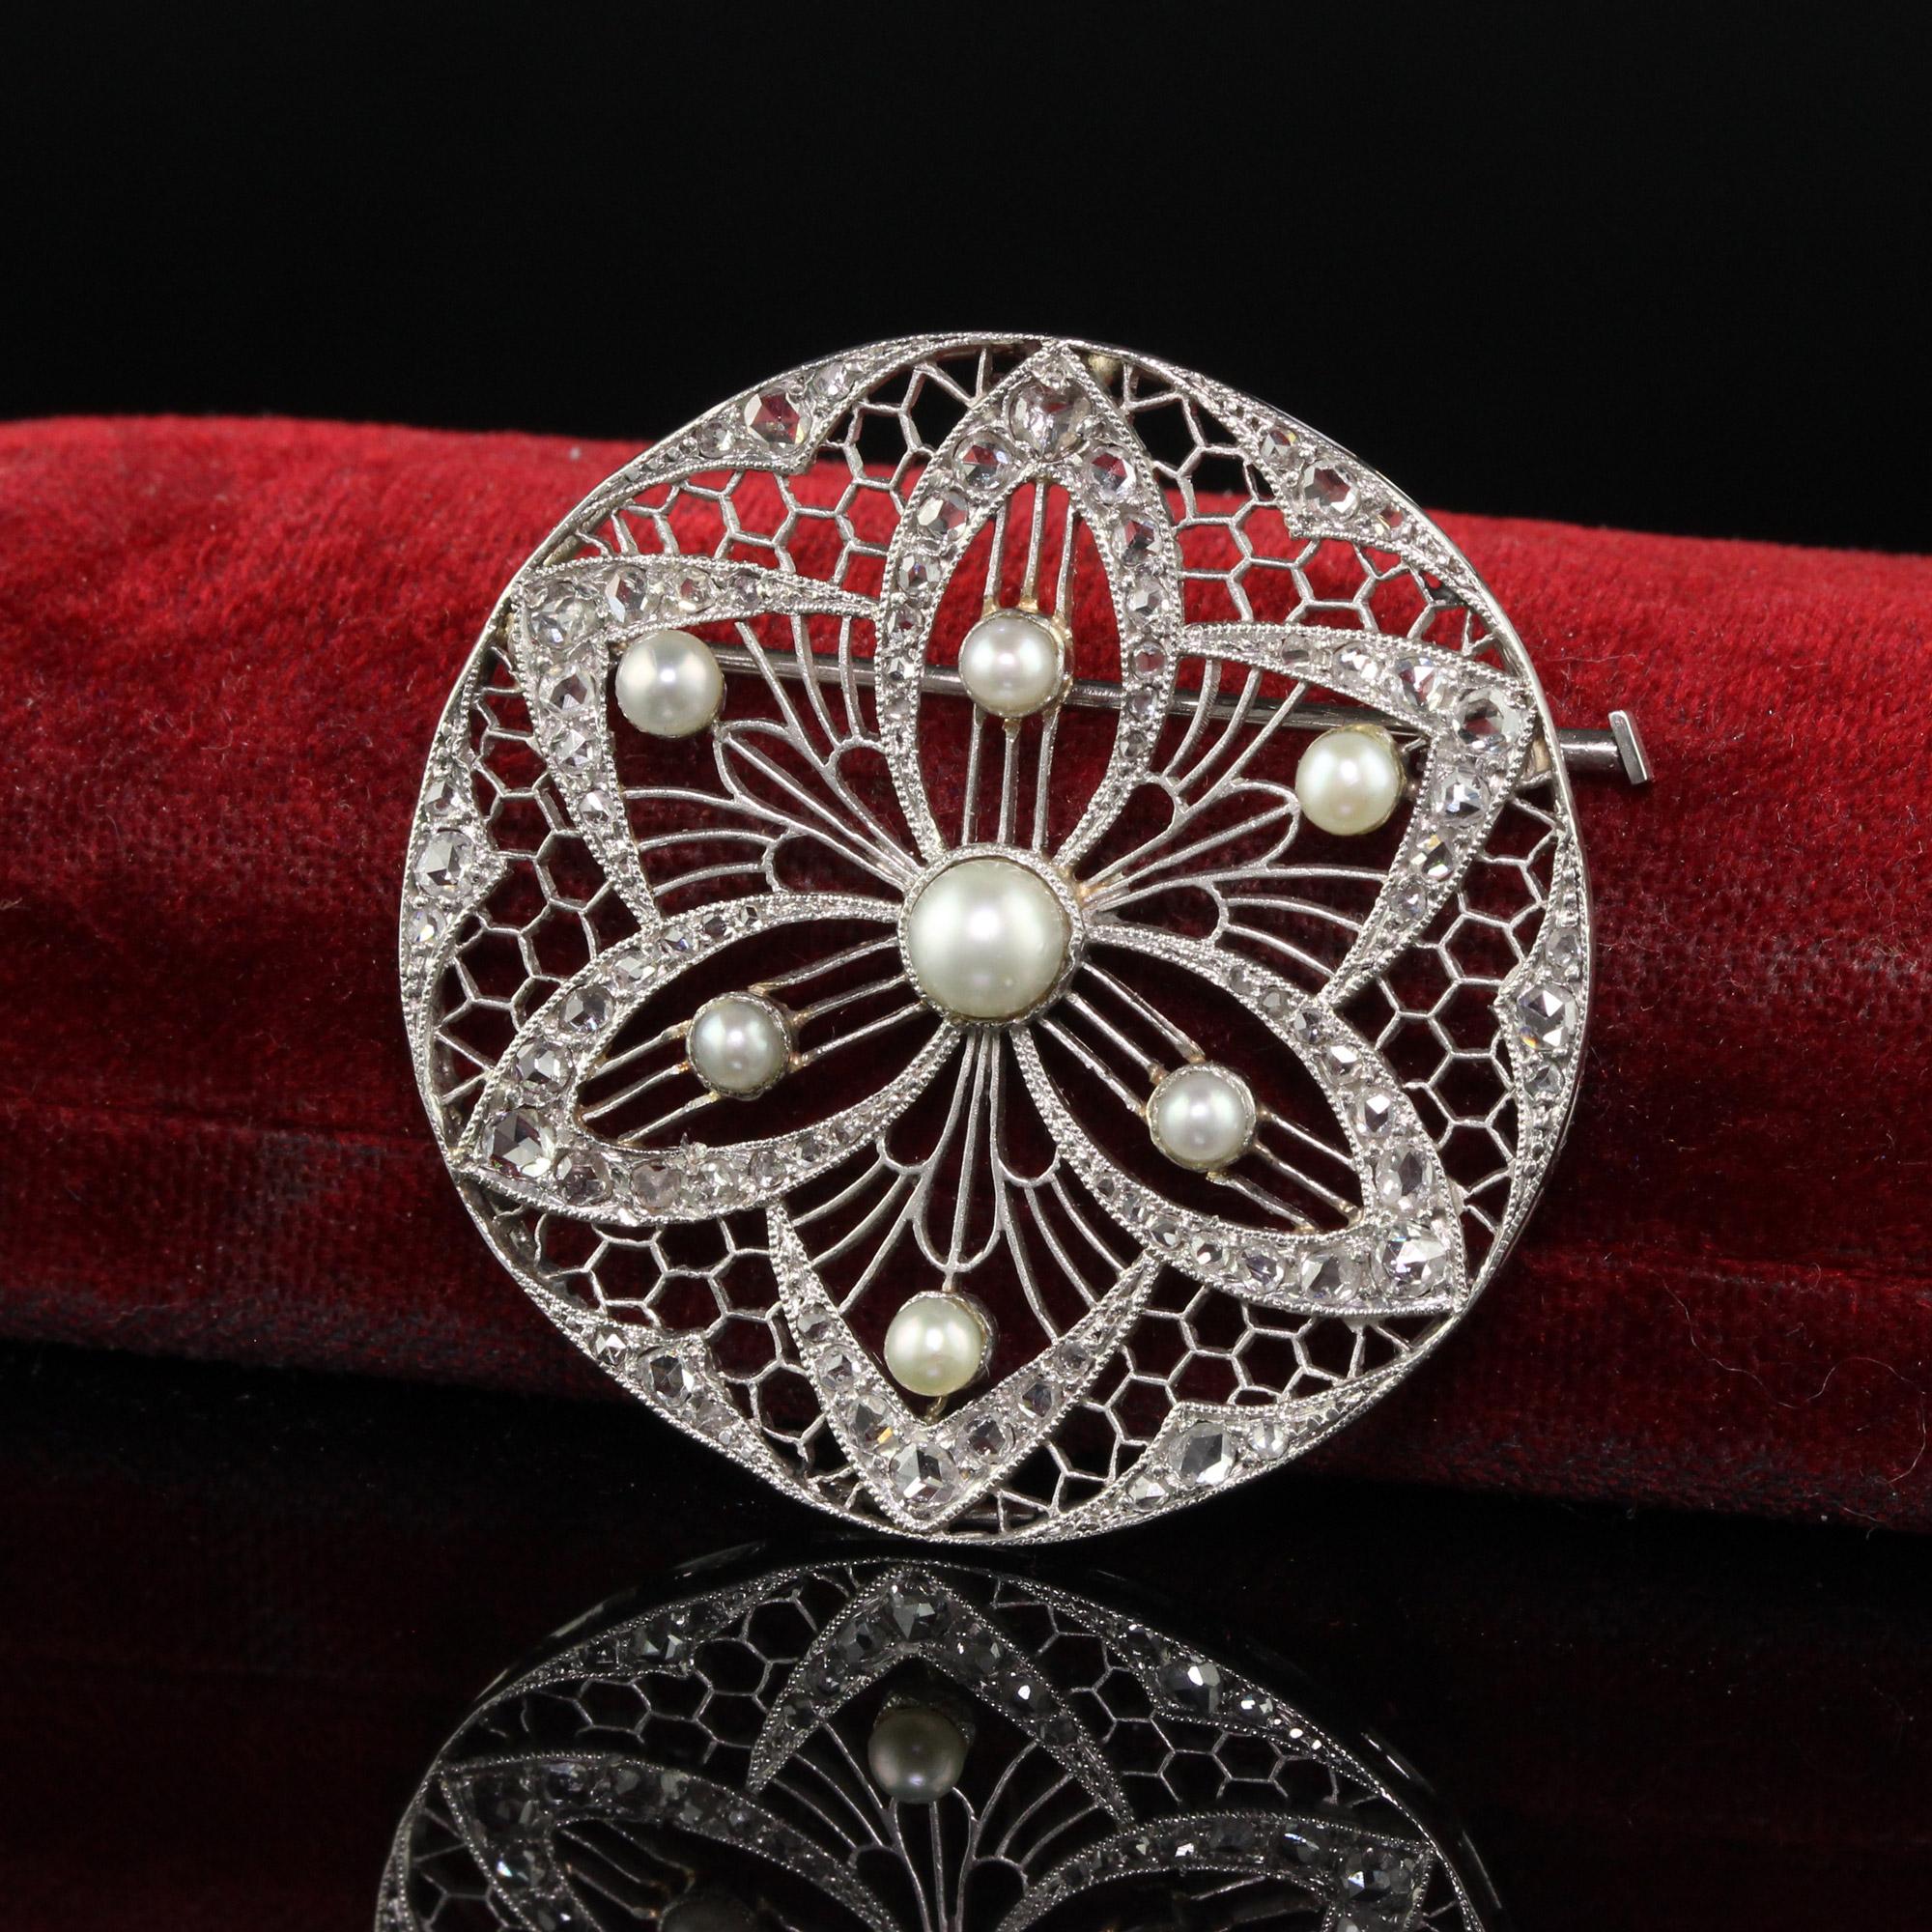 Beautiful Antique Edwardian Platinum Diamond and Pearl Filigree Pin. This incredible pin is crafted in platinum. The pin has beautiful rose cut diamonds set in an intricate filigree mounting with pearls. The pin is in good condition but shows signs